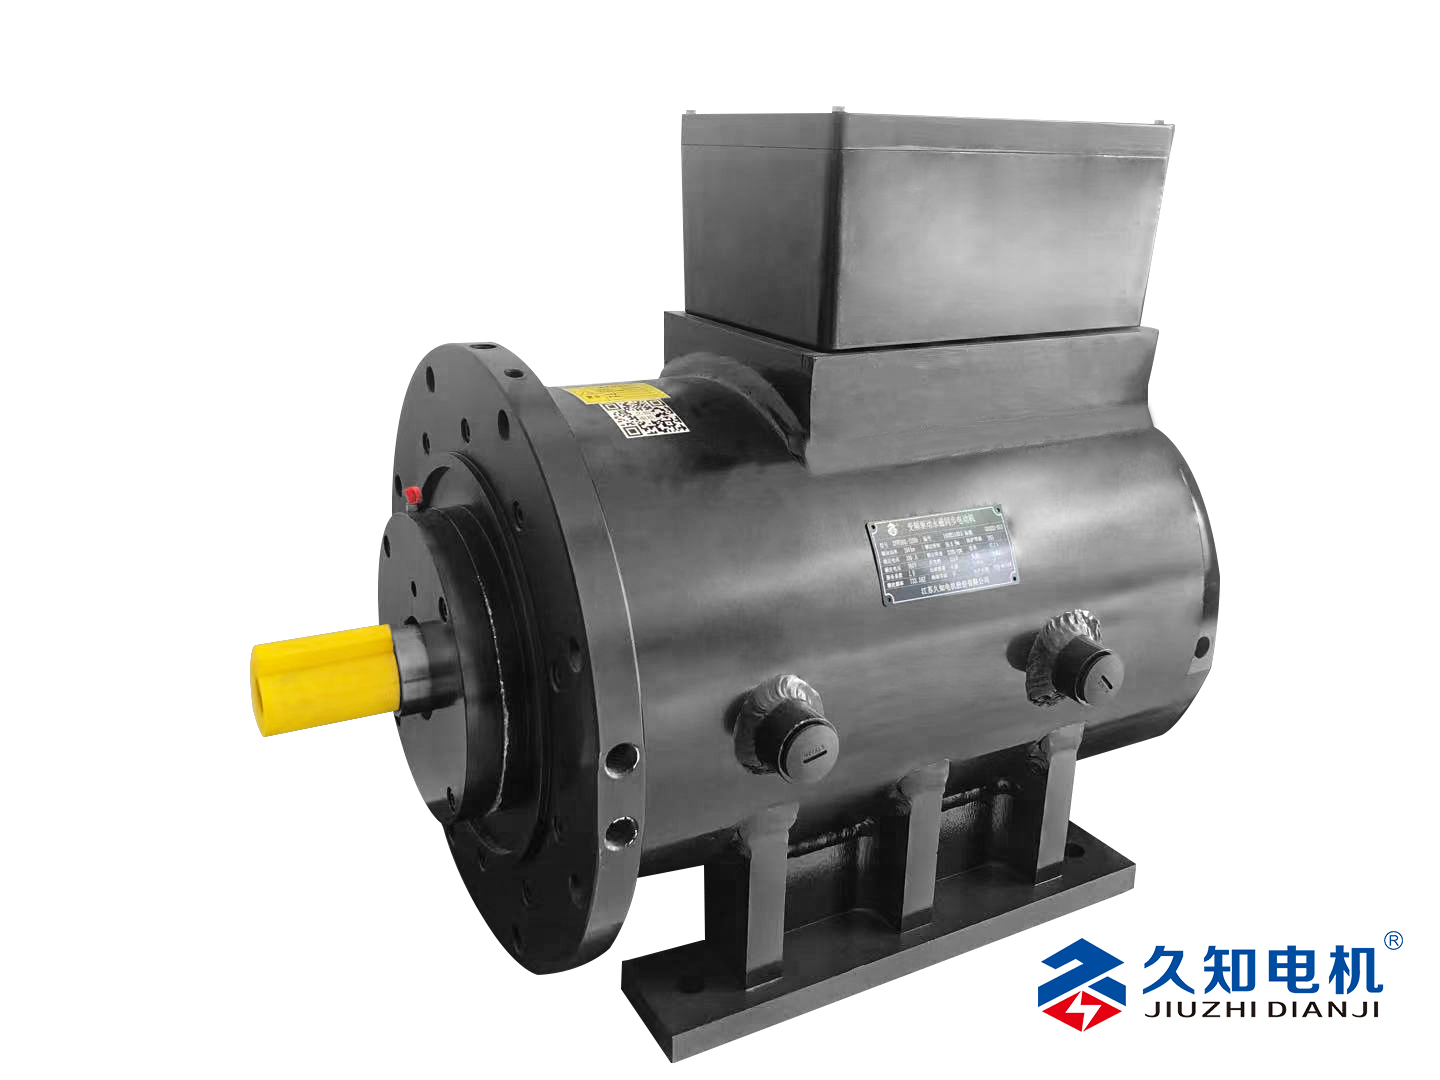 Oil/water-cooled permanent magnet motor